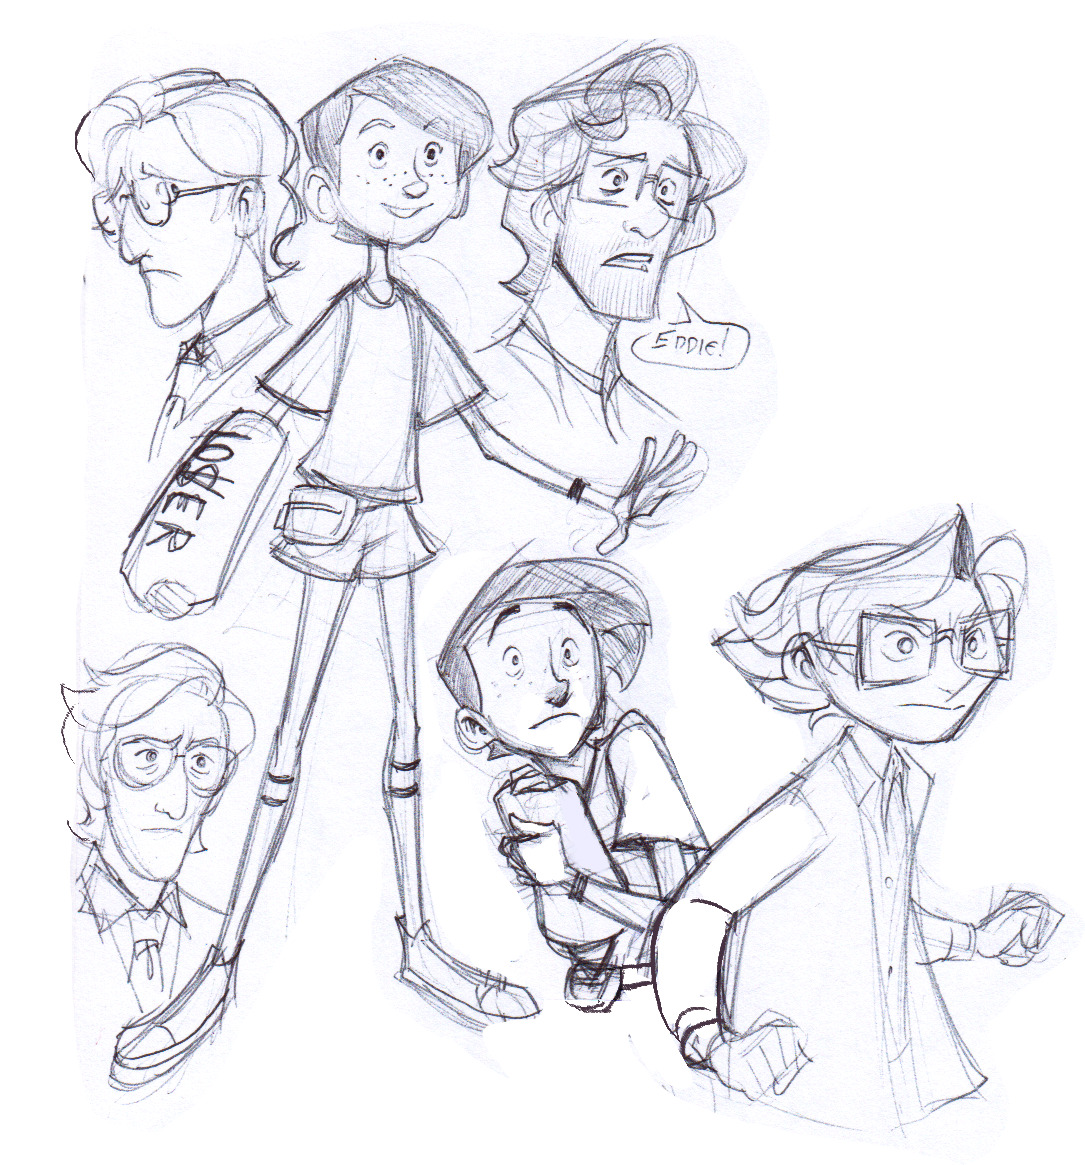 three-legged-cow: Some style studies with eddie and richie